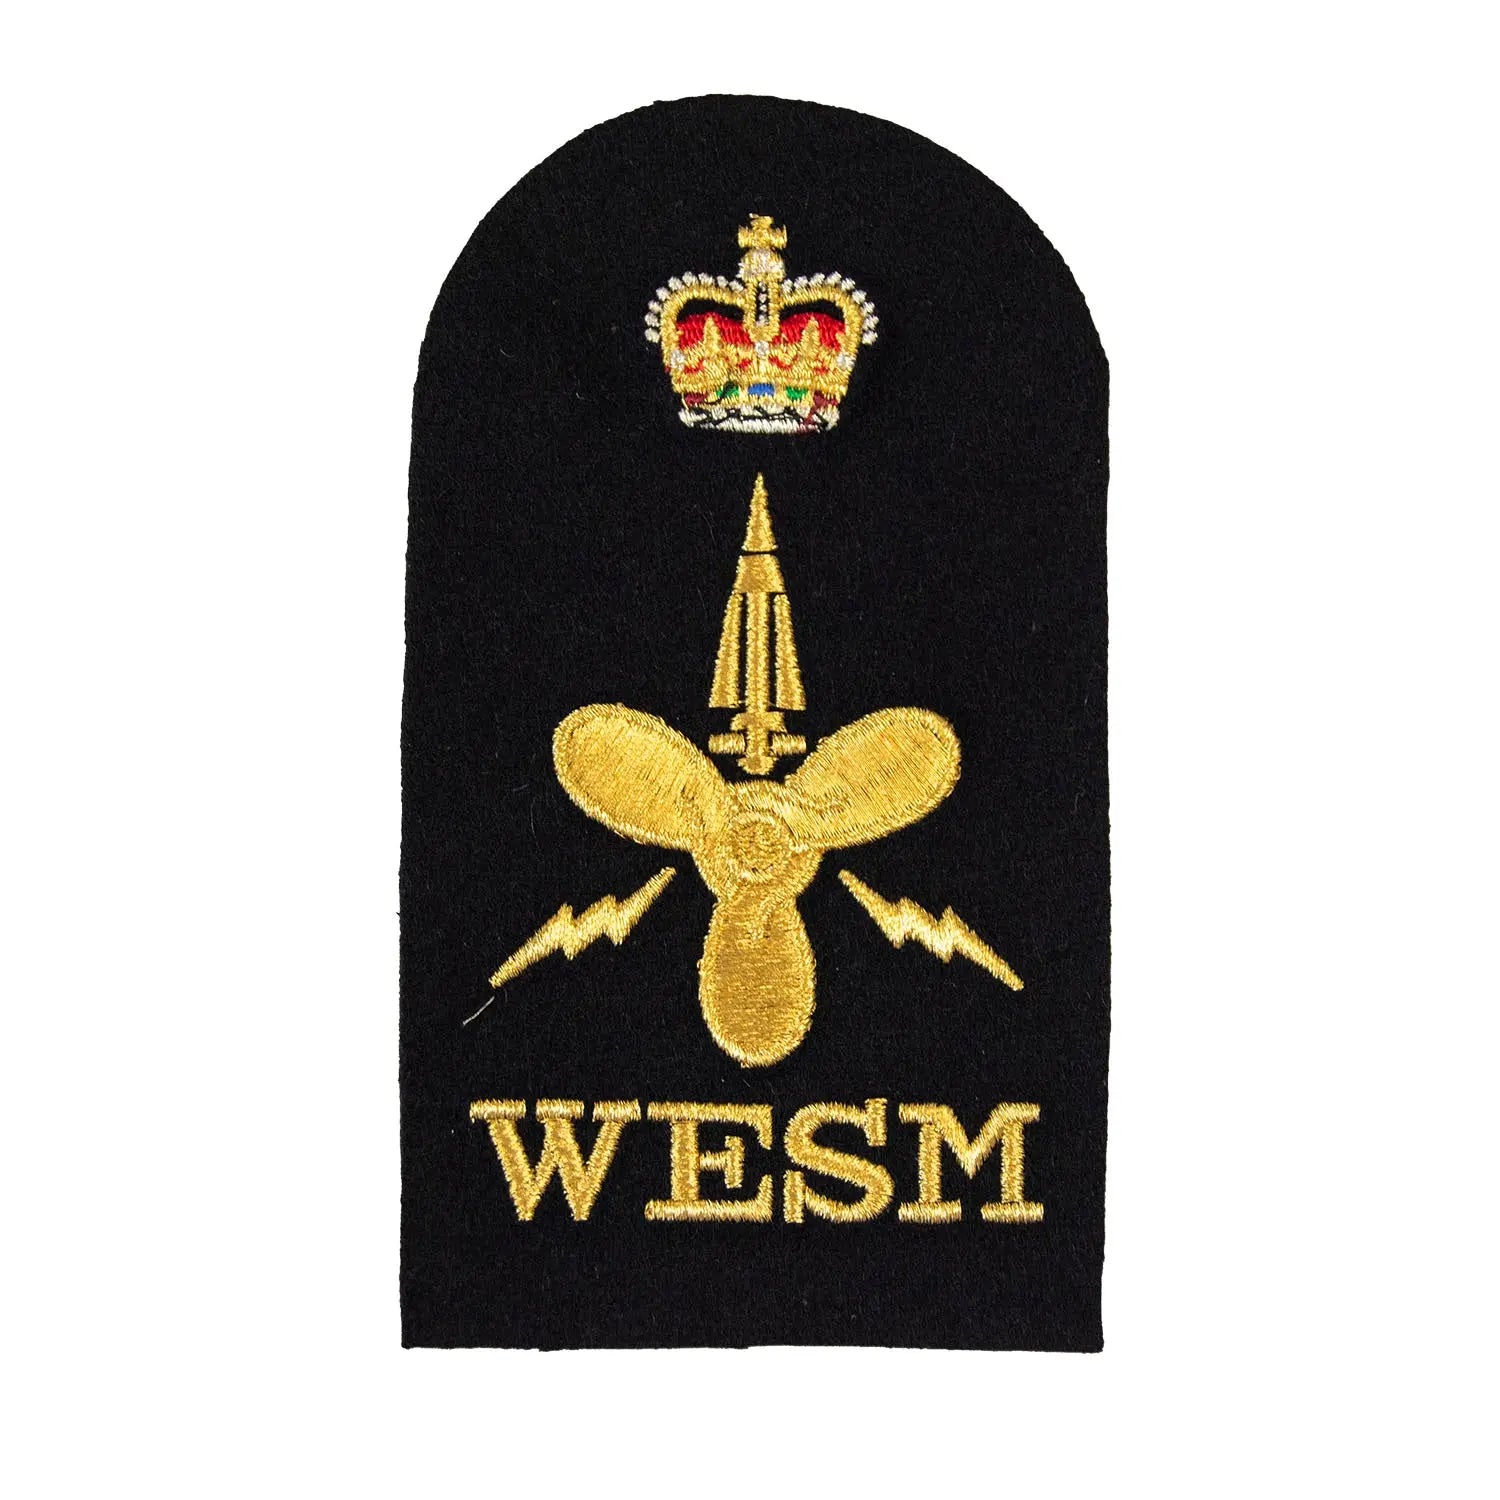 Engineering (WESM) Petty Officer Royal Navy Badges wyedean